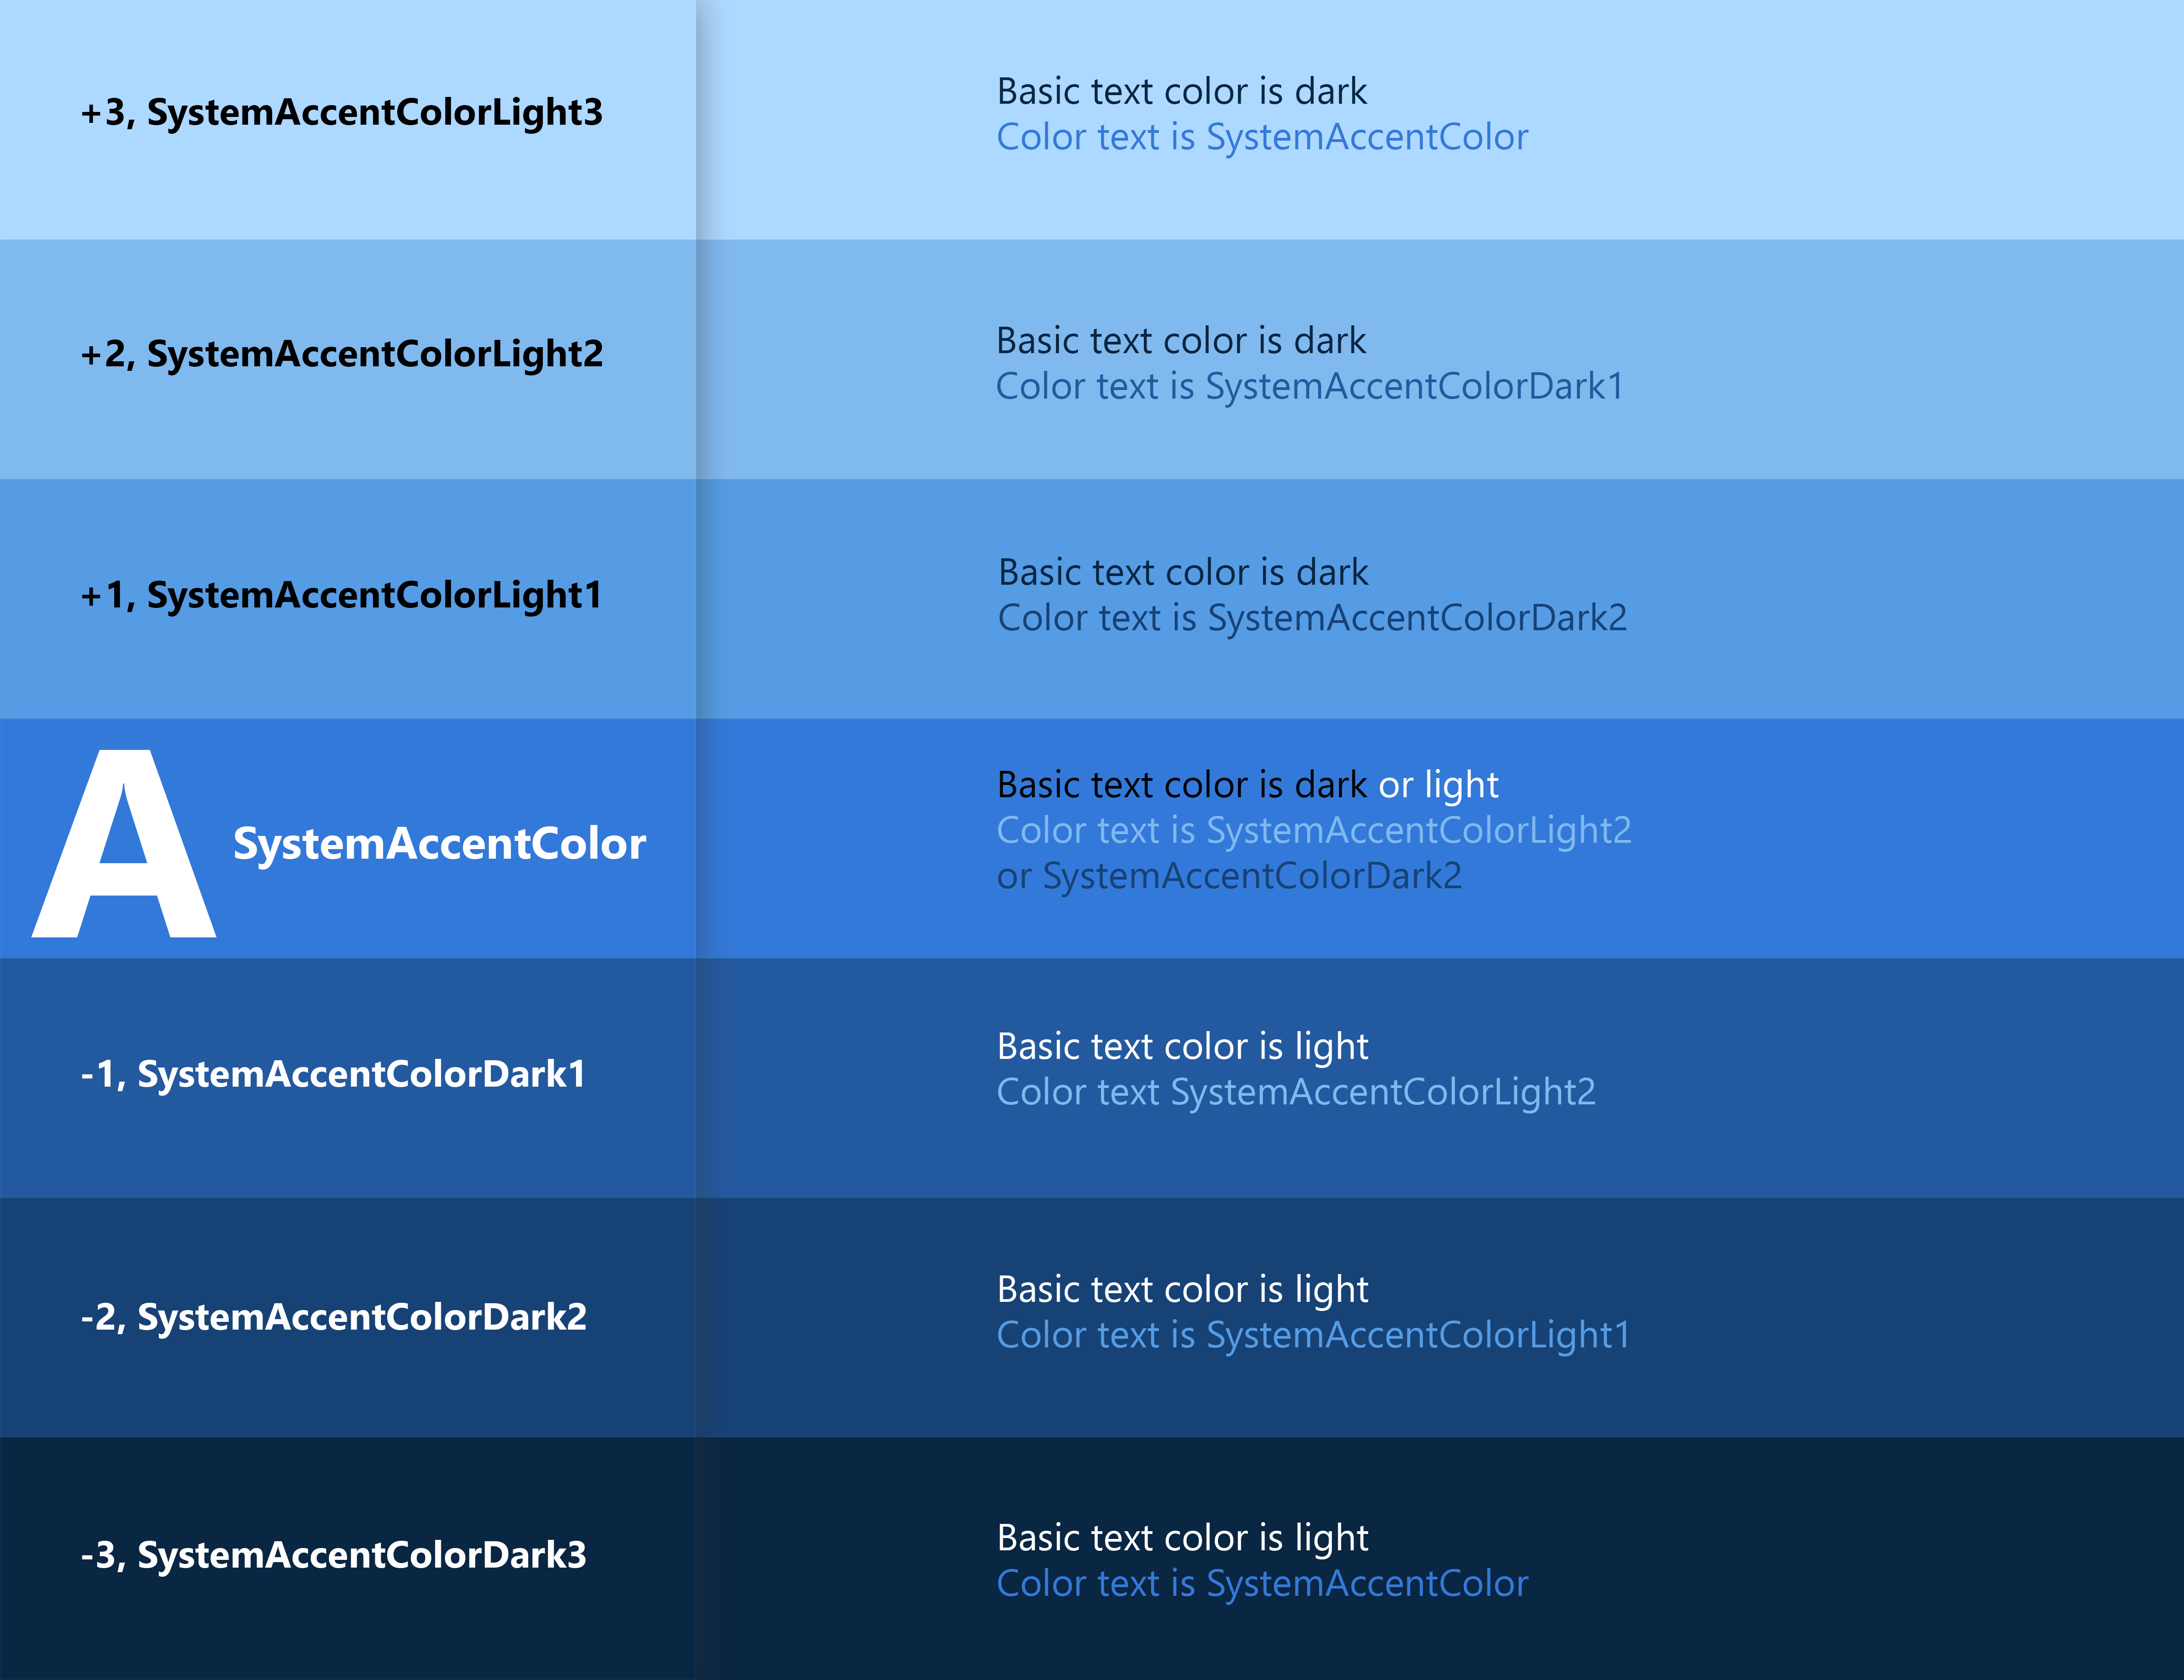 Screenshot of the Color on Color chart that shows a color gradient from light blue on the top changing to a dark blue on the bottom.